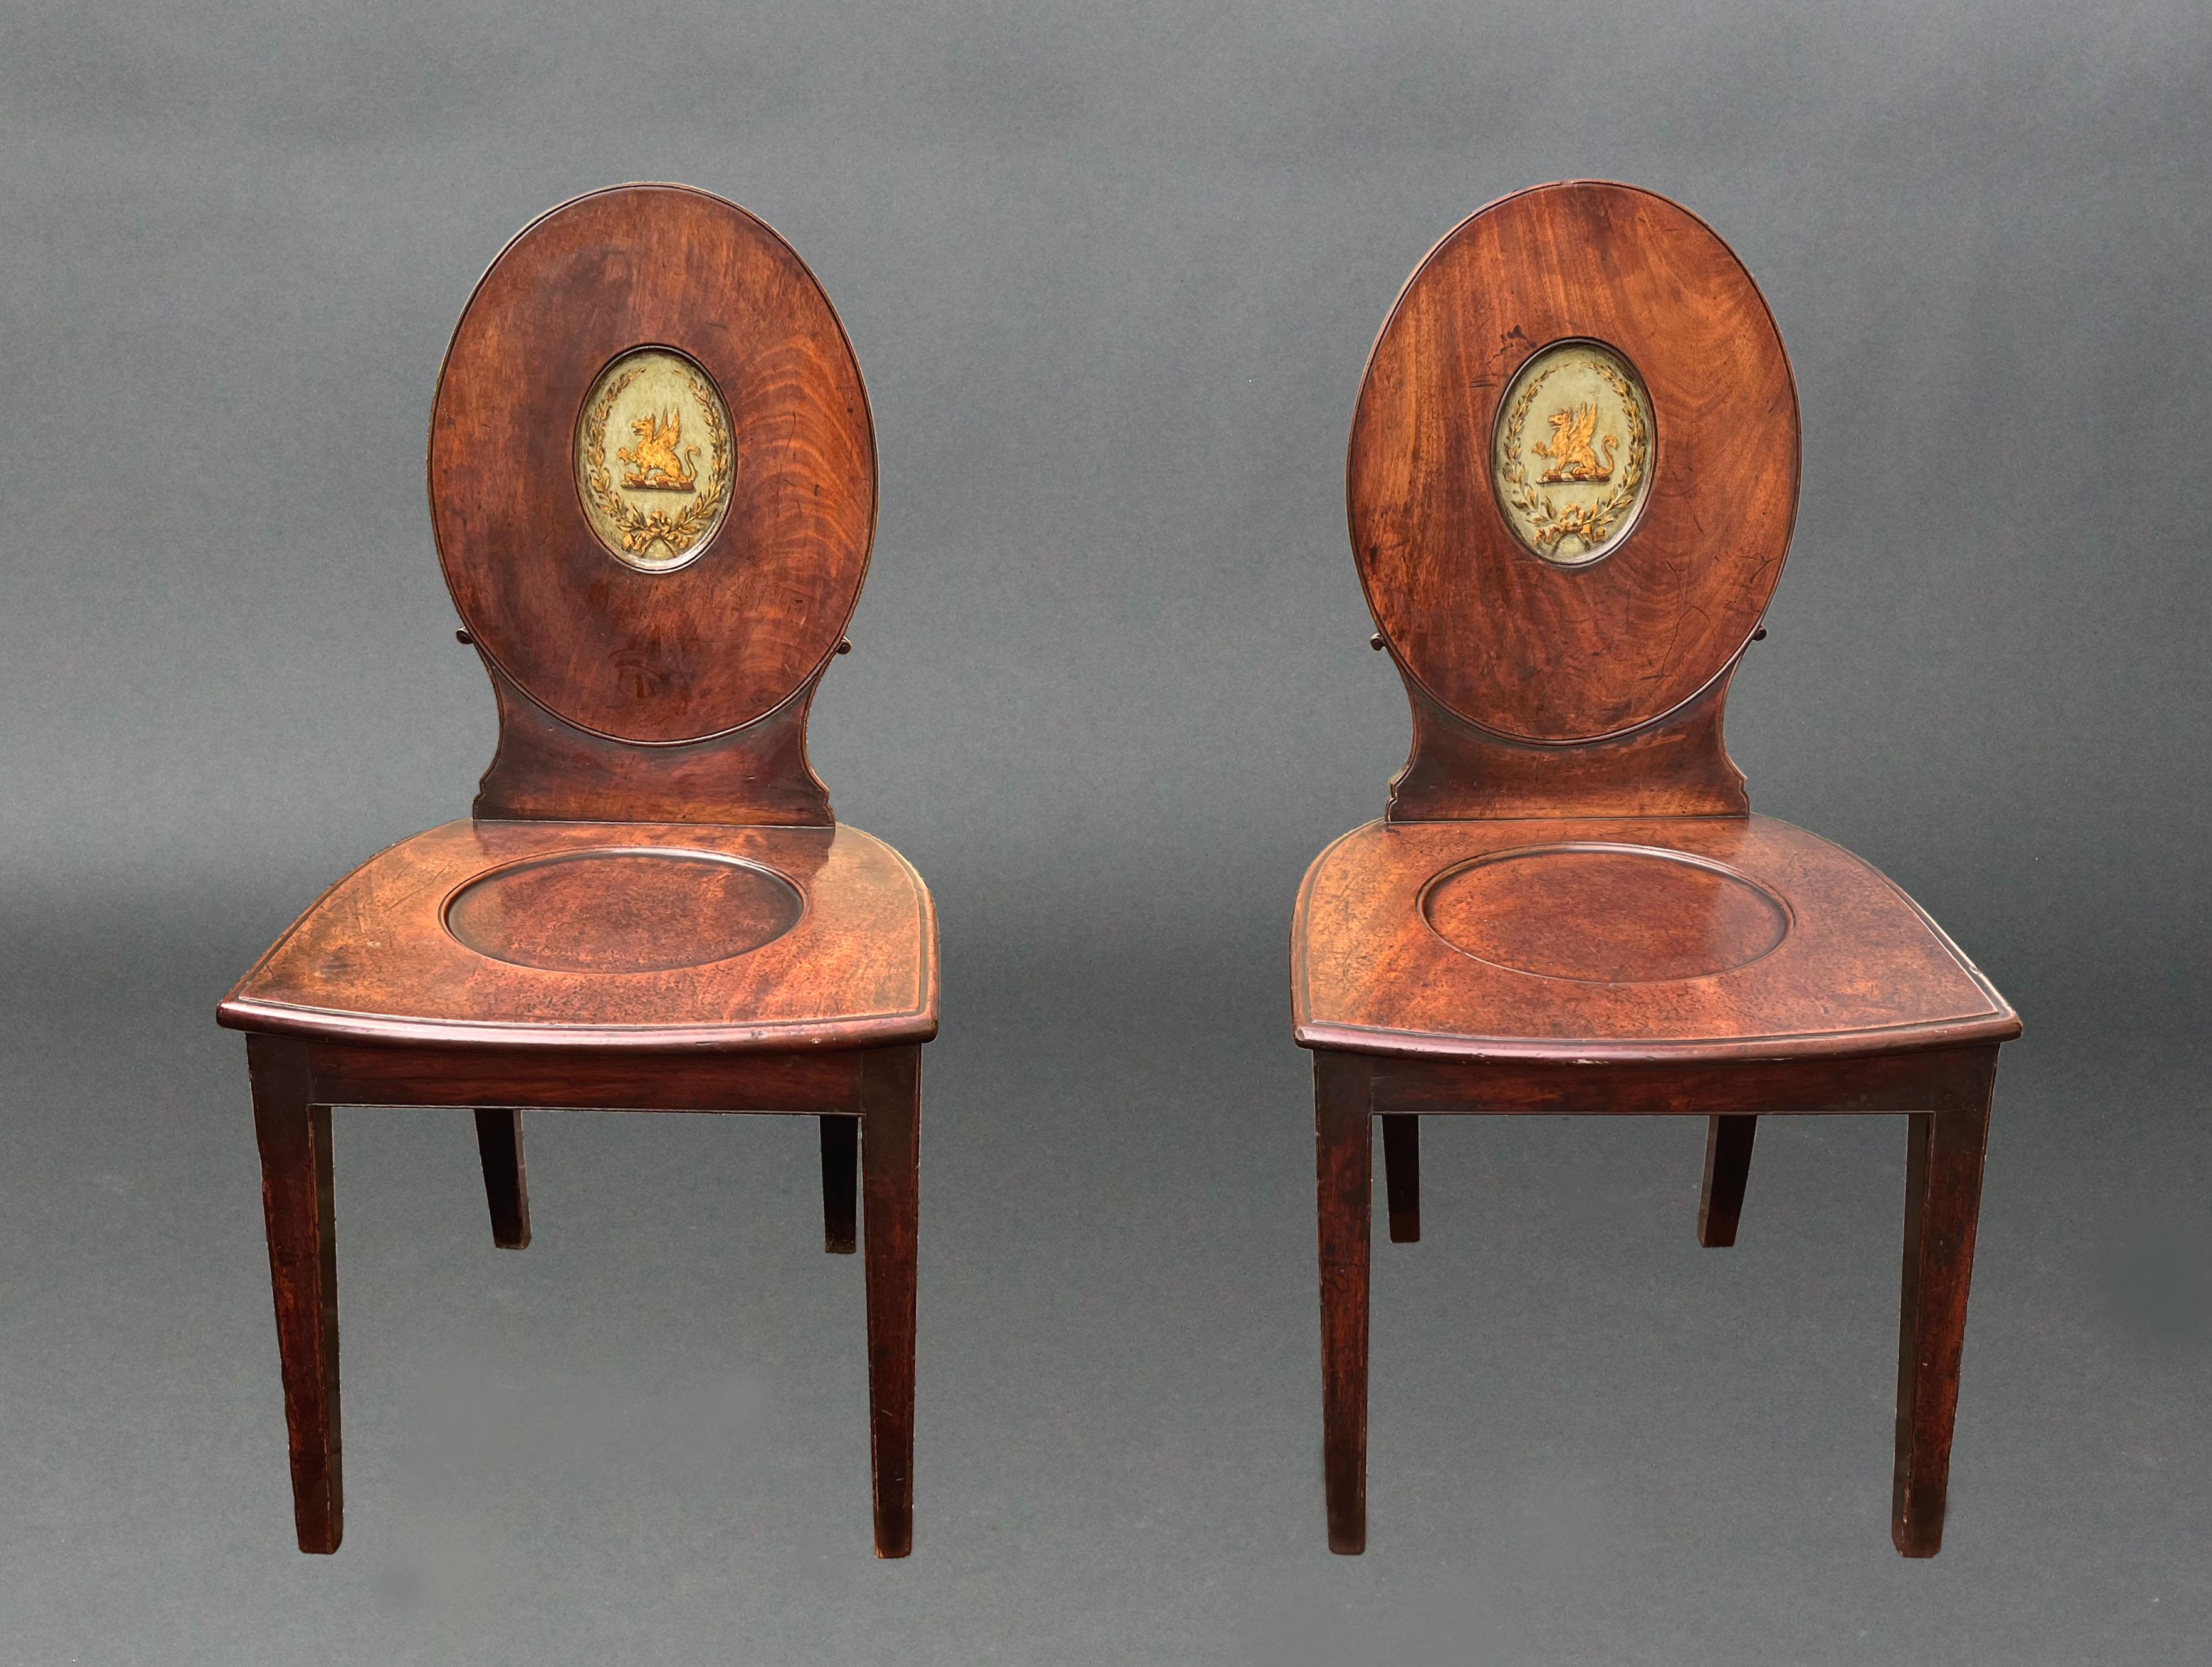 A pair of George III Hepplewhite period hall chairs of a good original colour and patina; the oval backs with centres finely decorated with gilded griffins and laurel wreaths on a pale green ground. The wide bow fronted dished seats raised on square